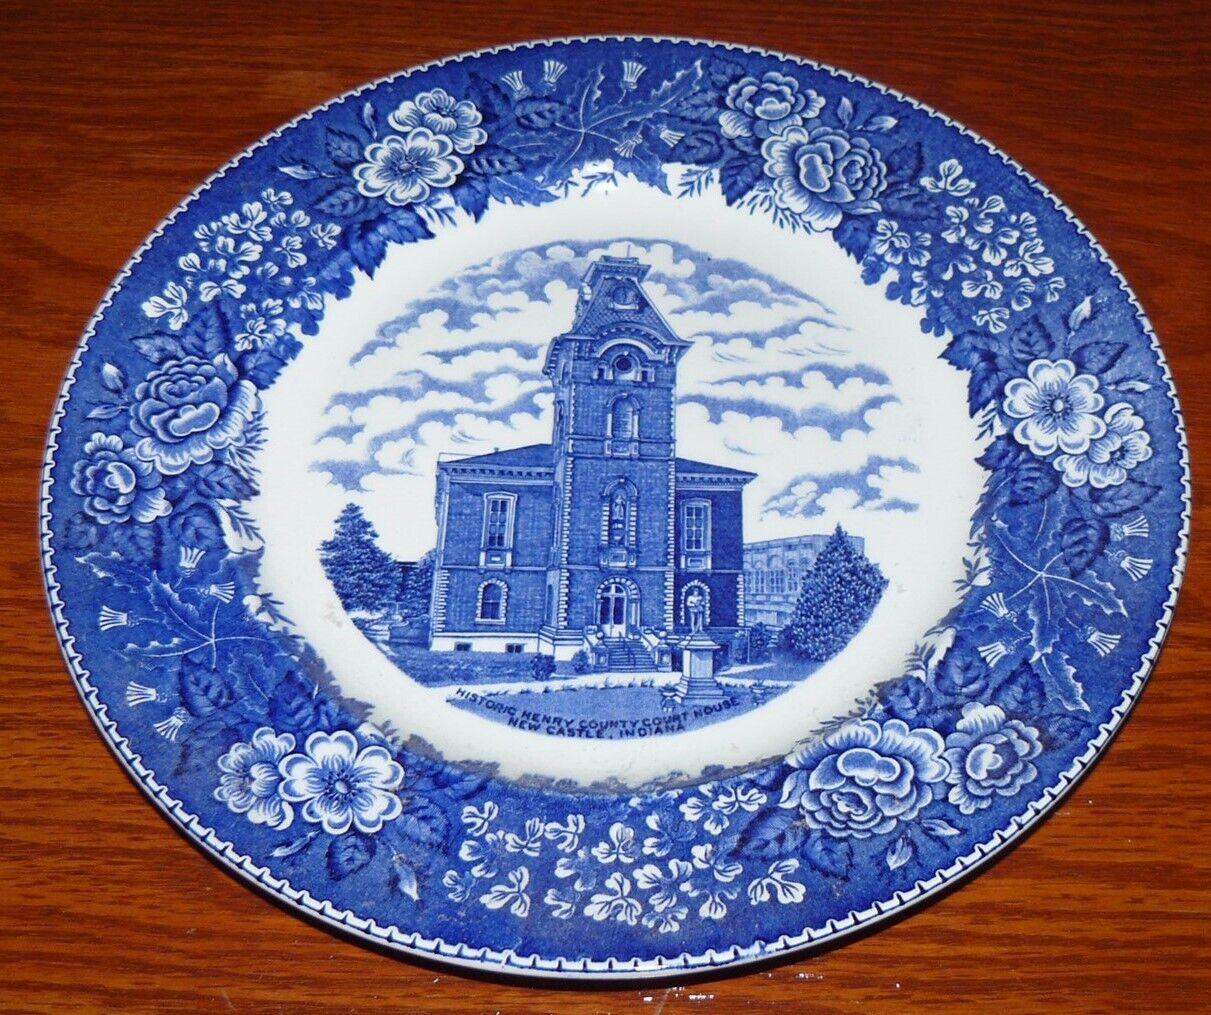 Adams Jonroth Souvenir Plate Henry County New Castle Indiana Courthouse